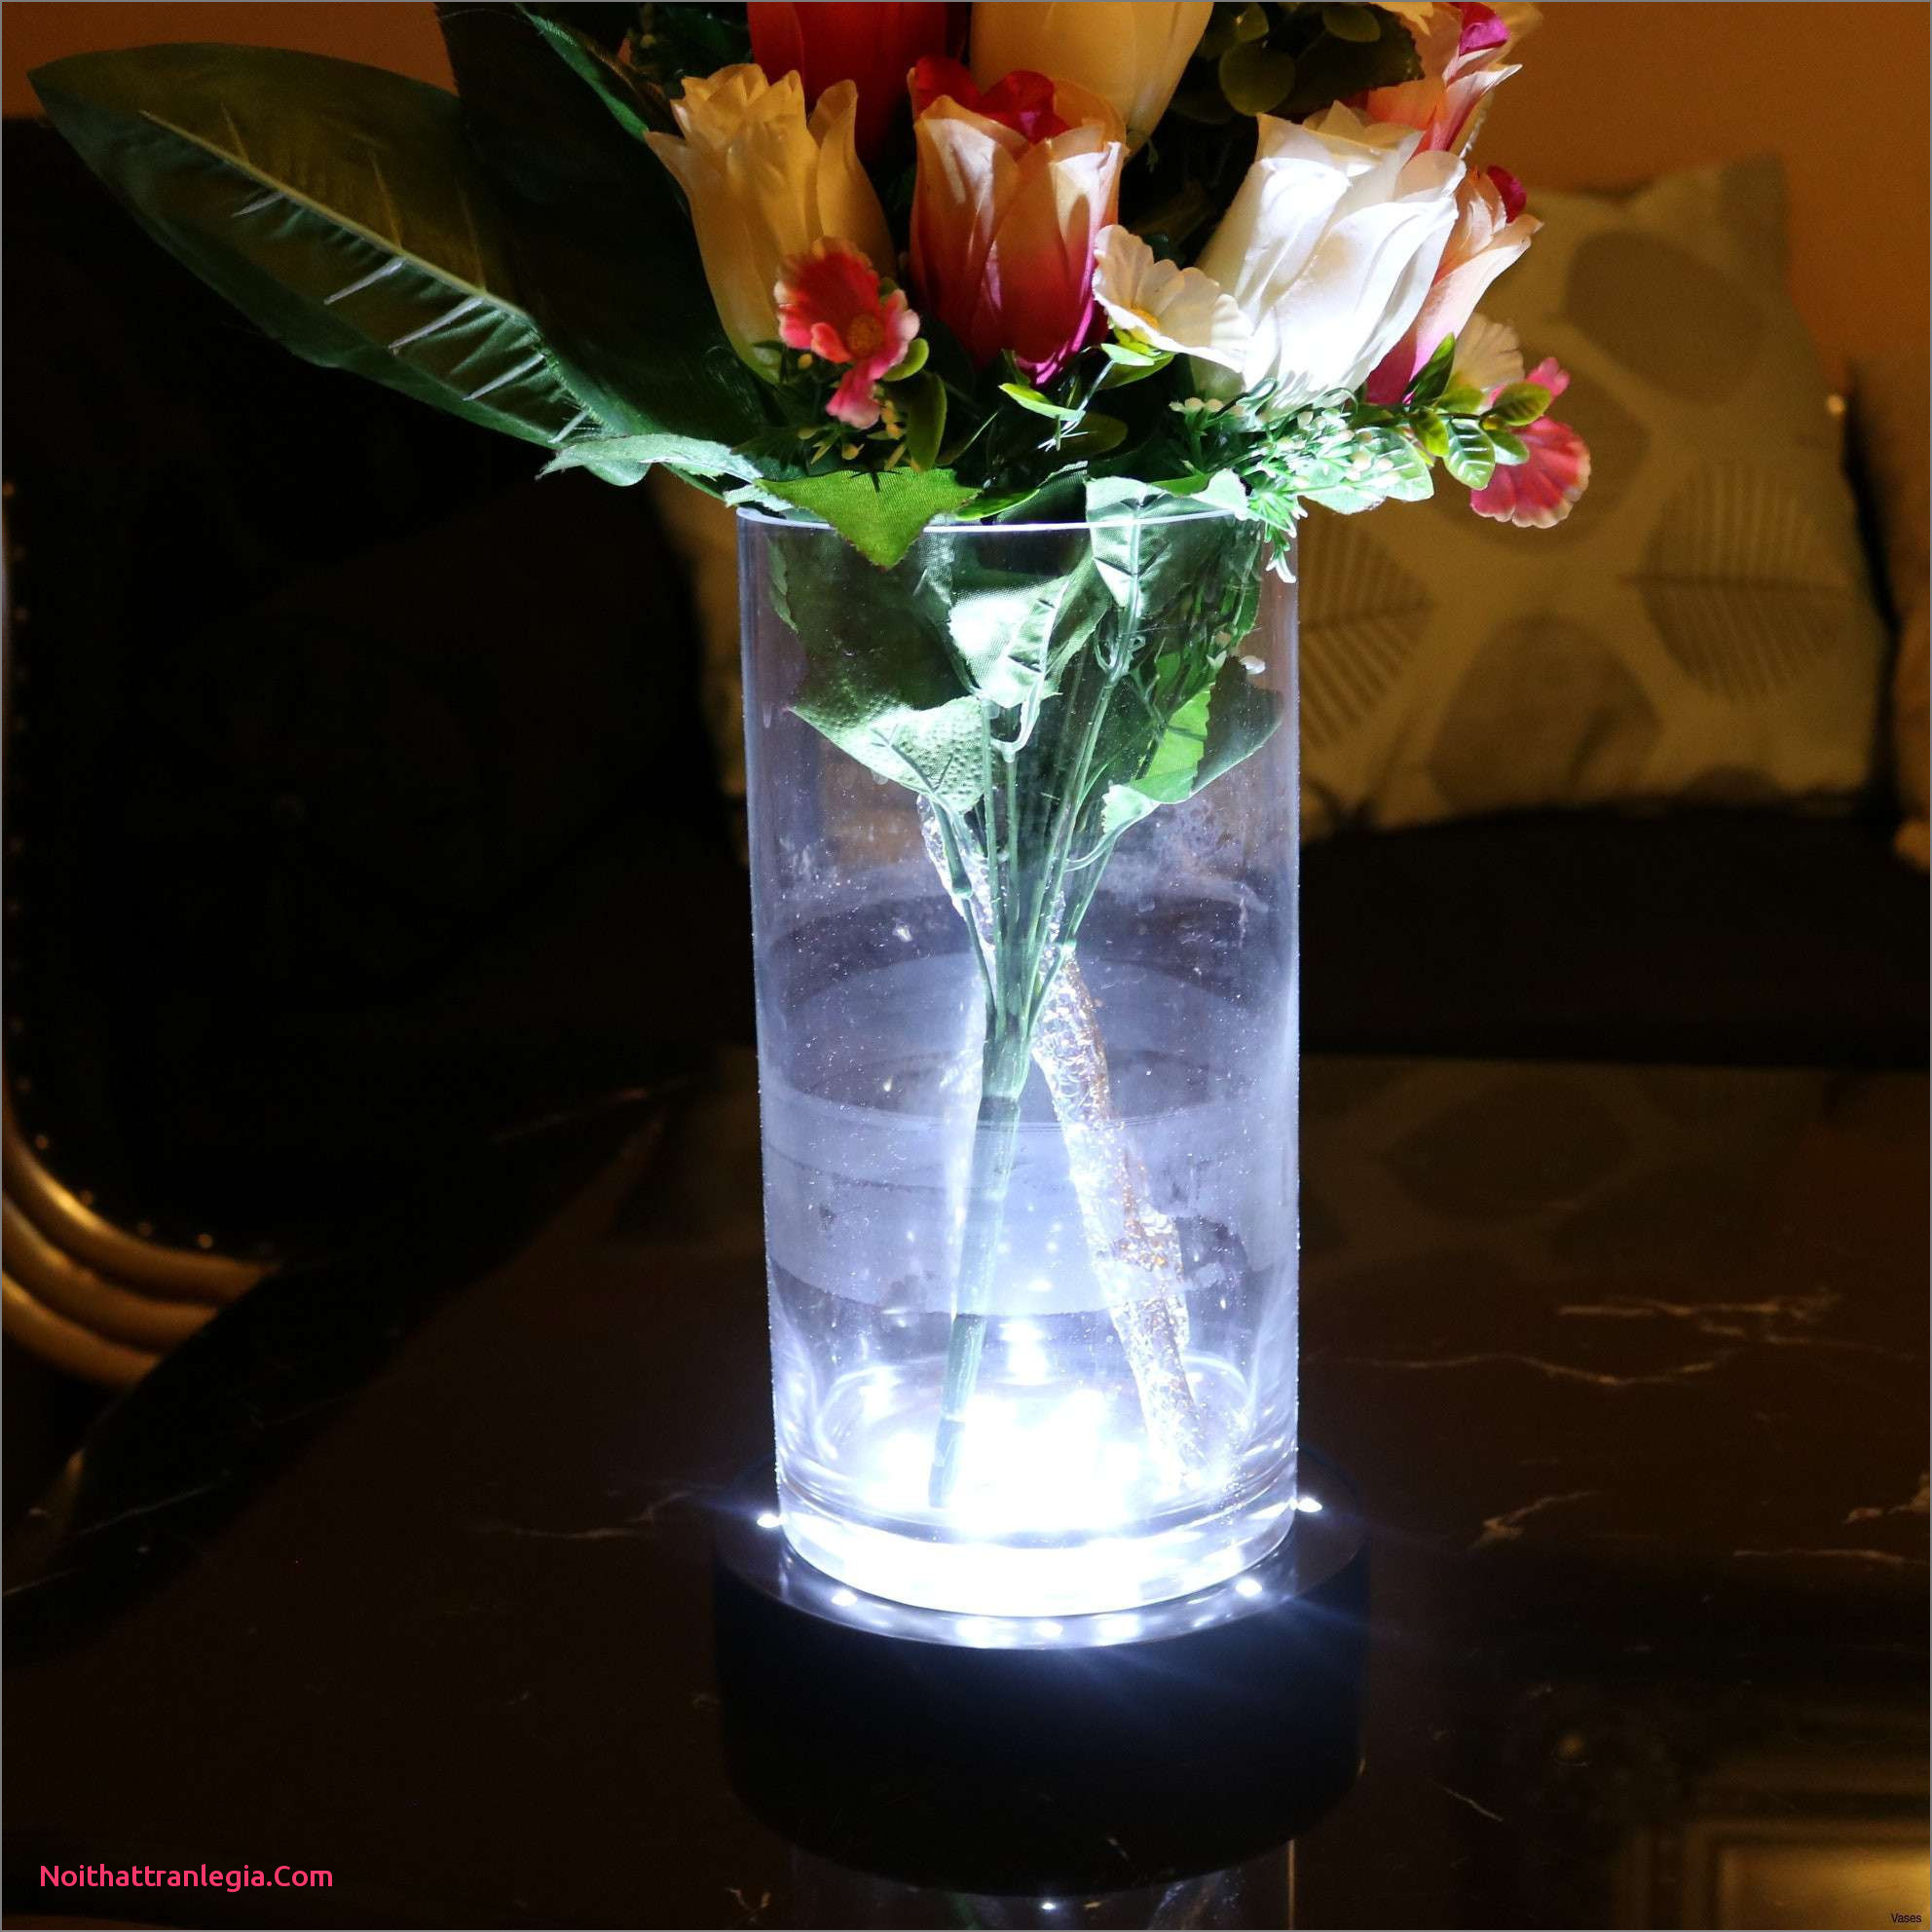 13 Stylish Ruby Cut Glass Vase 2024 free download ruby cut glass vase of 20 cut glass antique vase noithattranlegia vases design pertaining to glass wall vases gallery vases disposable plastic single cheap flower rose vasei 0d design glass